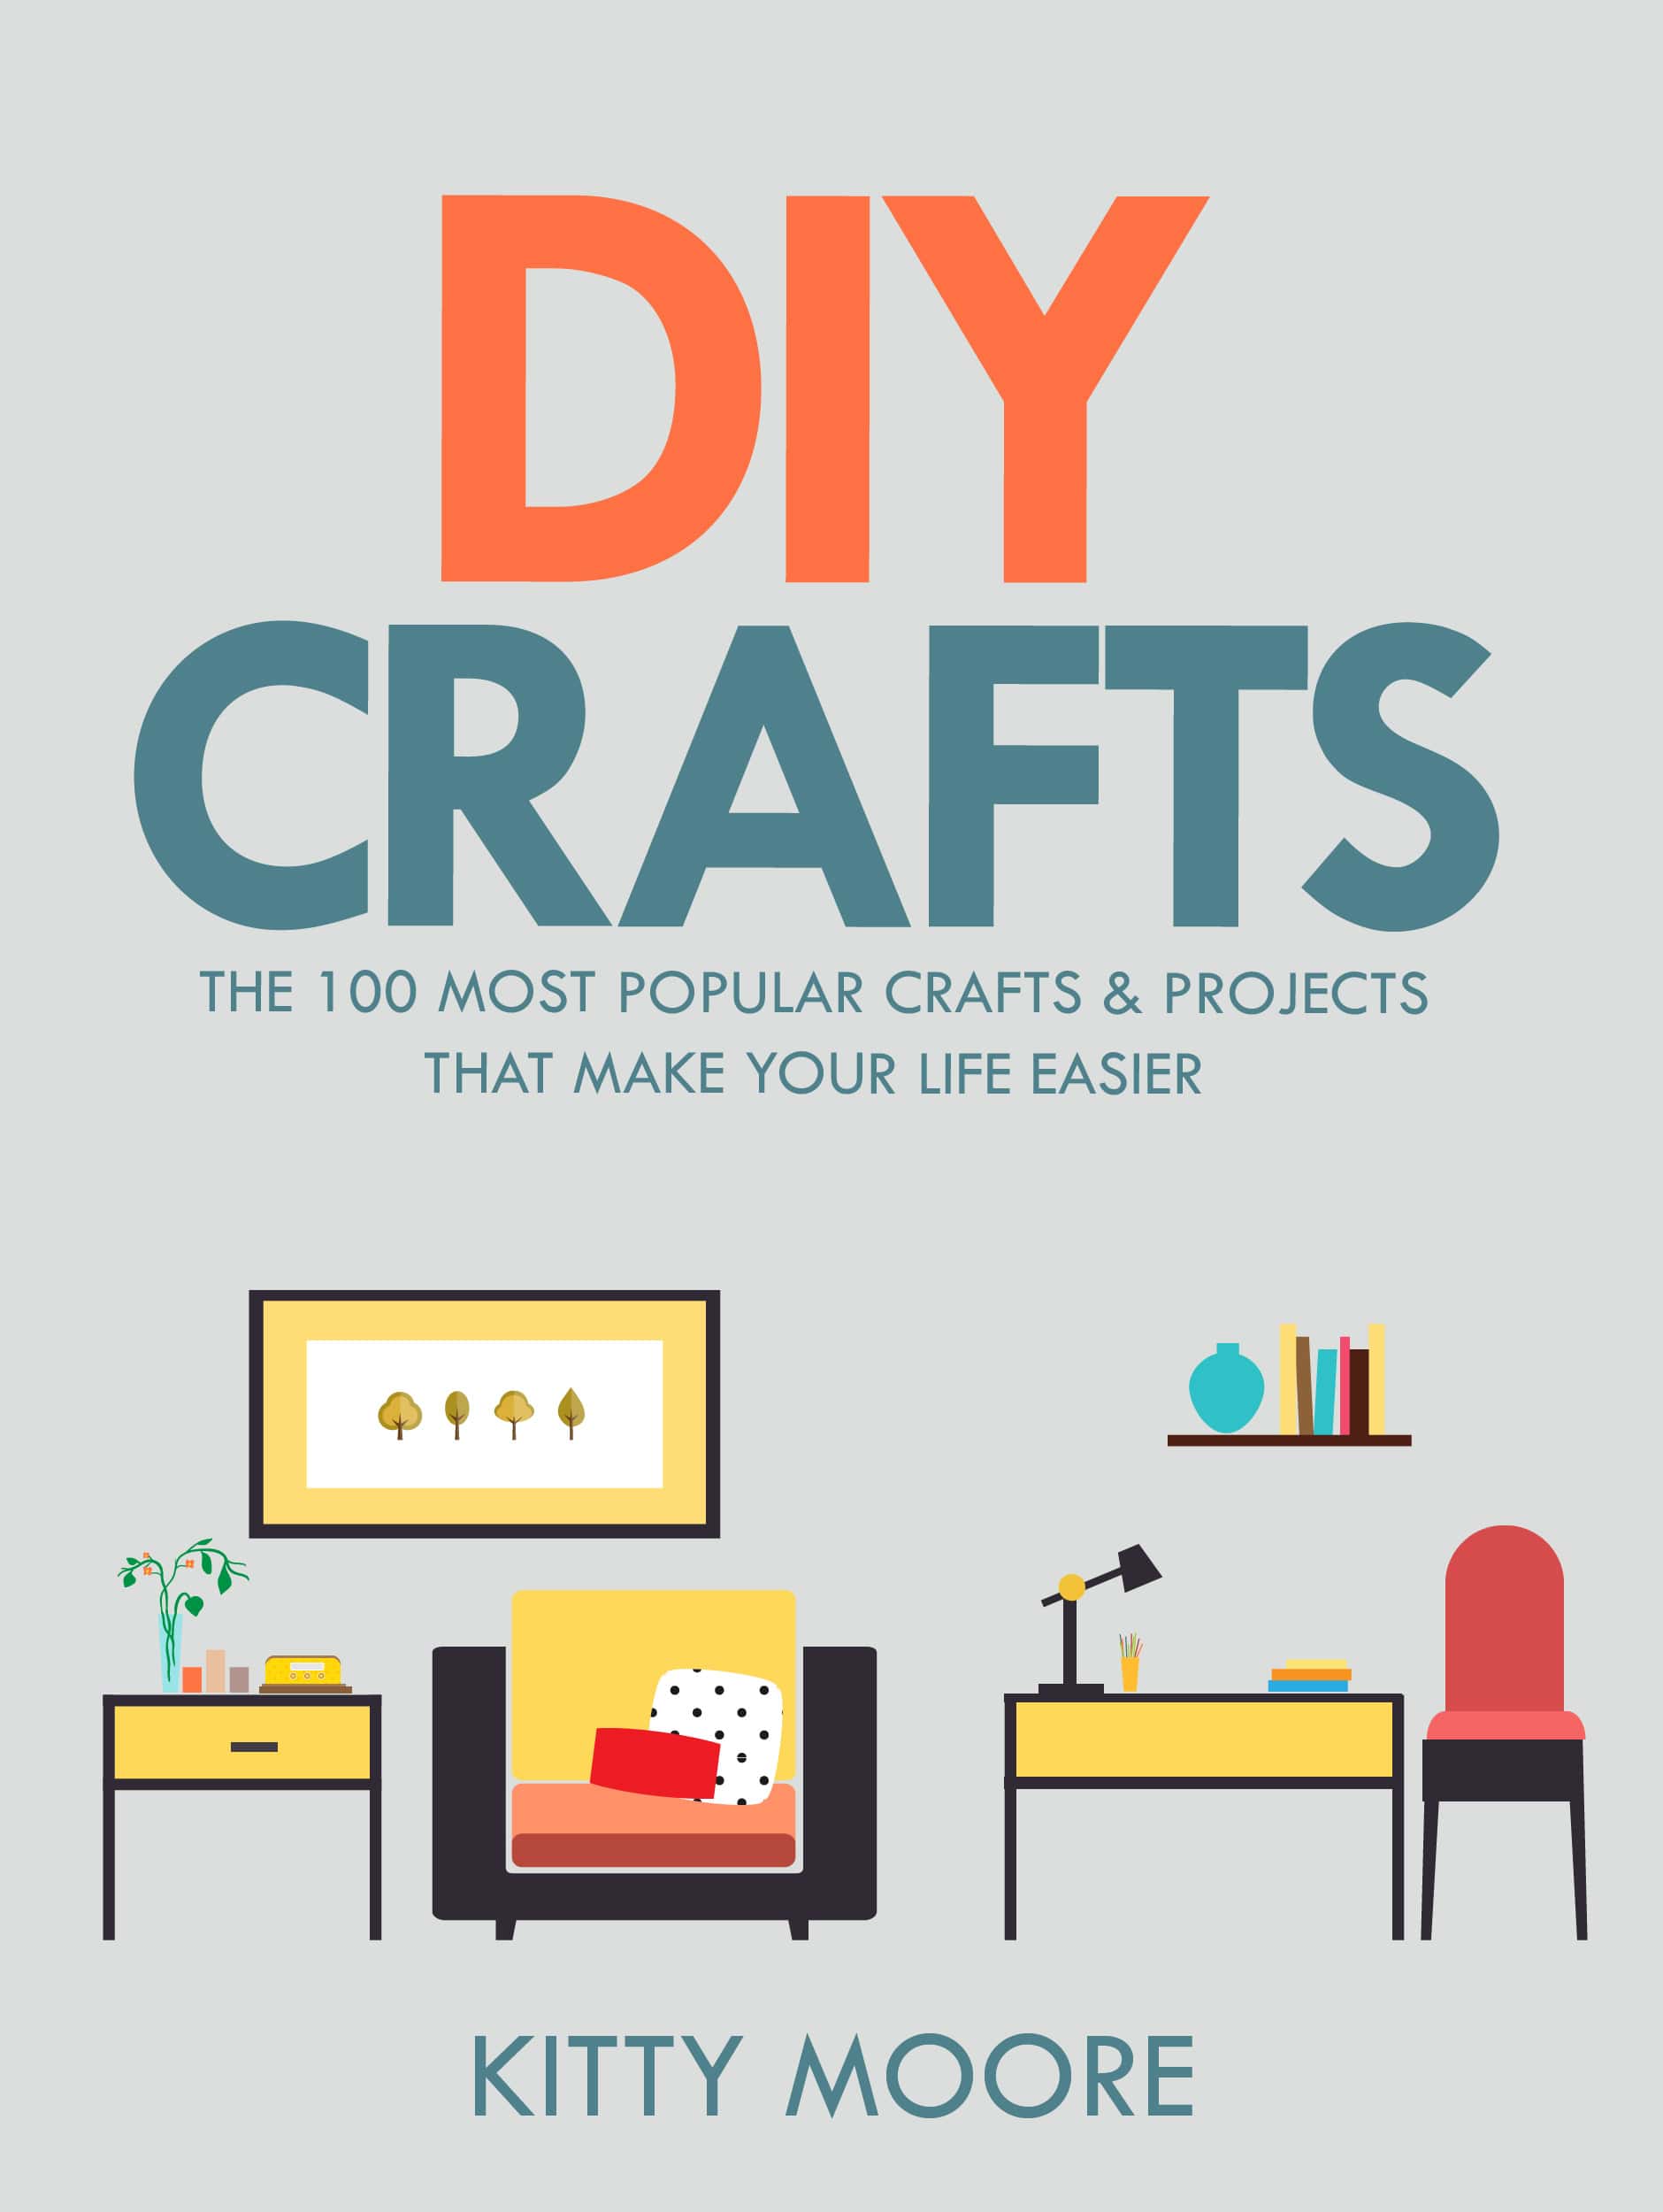 FREE: DIY Crafts (2nd Edition): The 100 Most Popular Crafts & Projects That Make Your Life Easier, Keep You Entertained, And Help With Cleaning & Organizing! by Kitty Moore